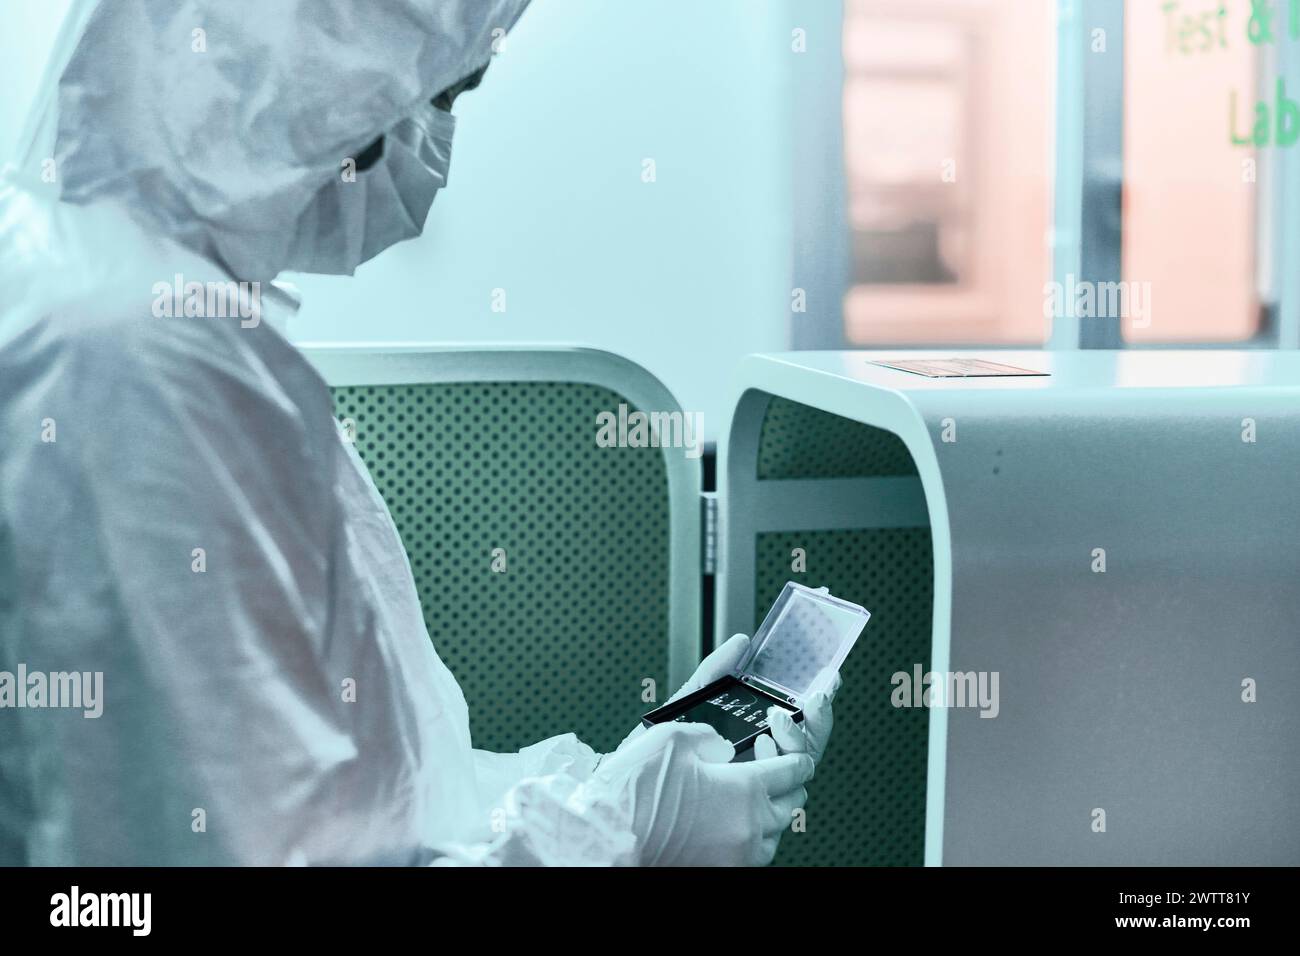 Experienced labratory scientist examining dna experiement testing equipment in the labratory sealed containment fridge Stock Photo